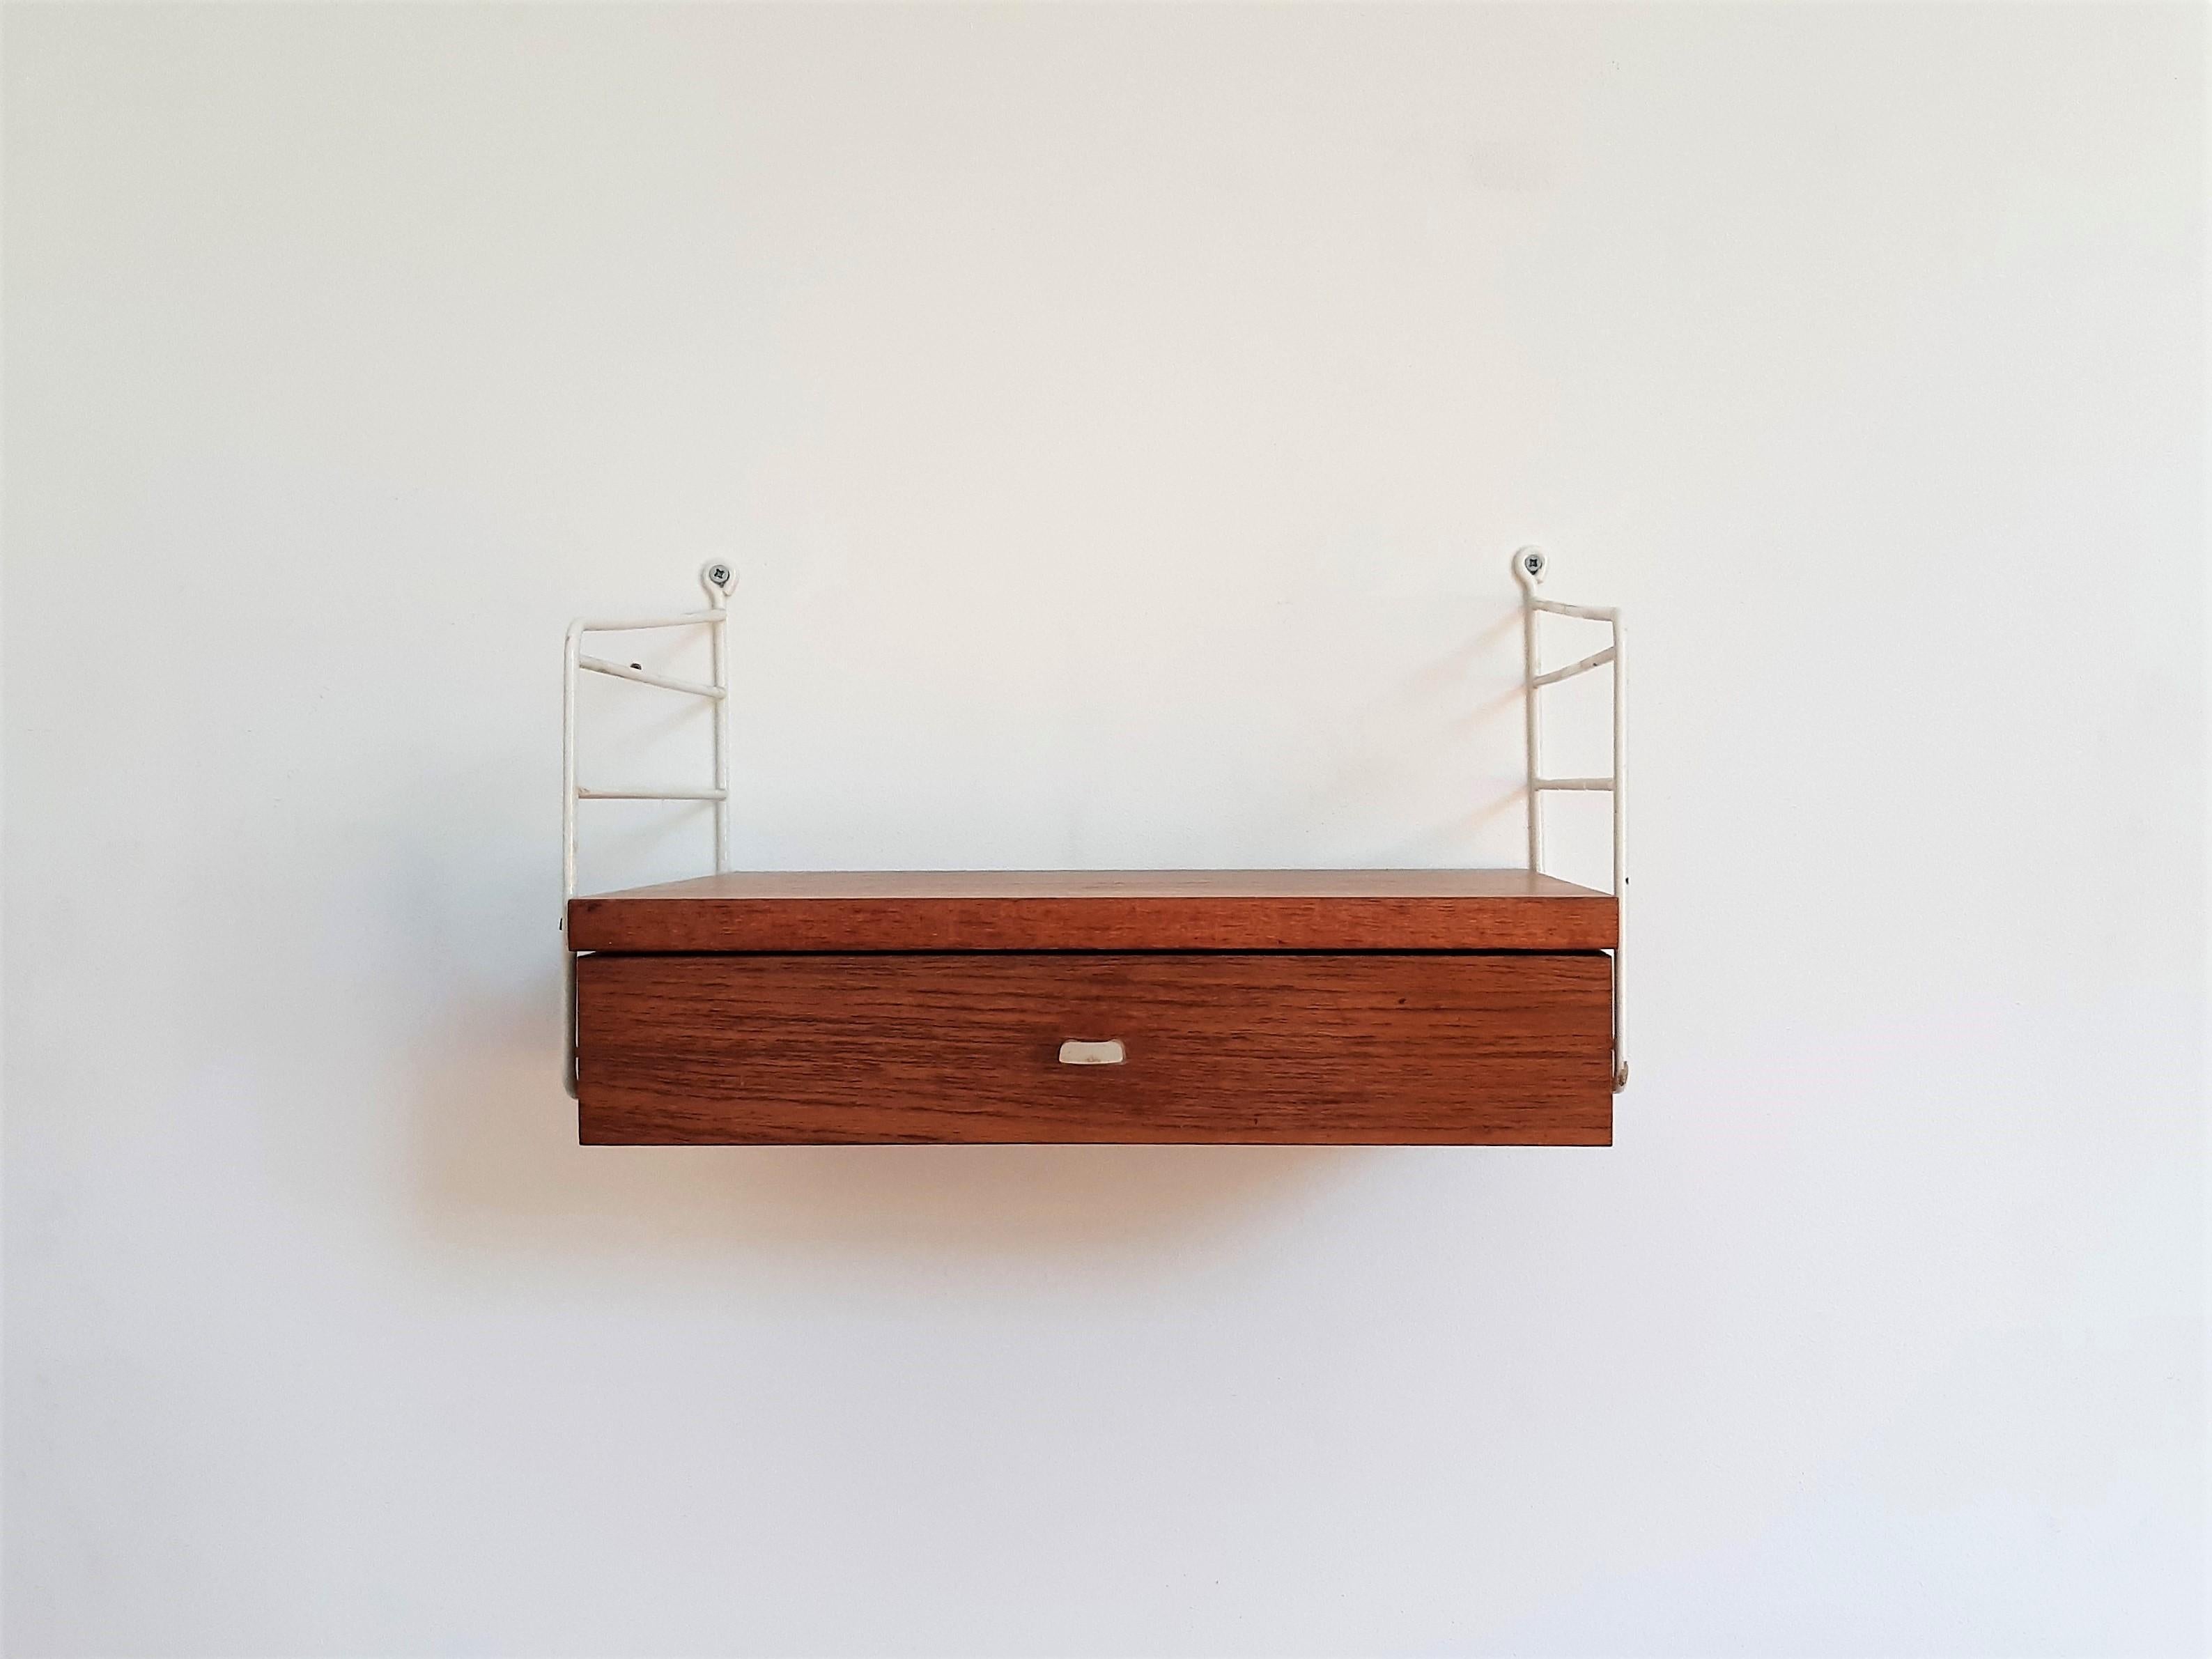 This charming and rare set of 2 wall mounted drawer units was designed by Nisse Strinning and made for String AB in the 1950's/1960's in Sweden. This is an original set of 2 and each unit consists out of 2 white coated metal uprights, holding 1 teak